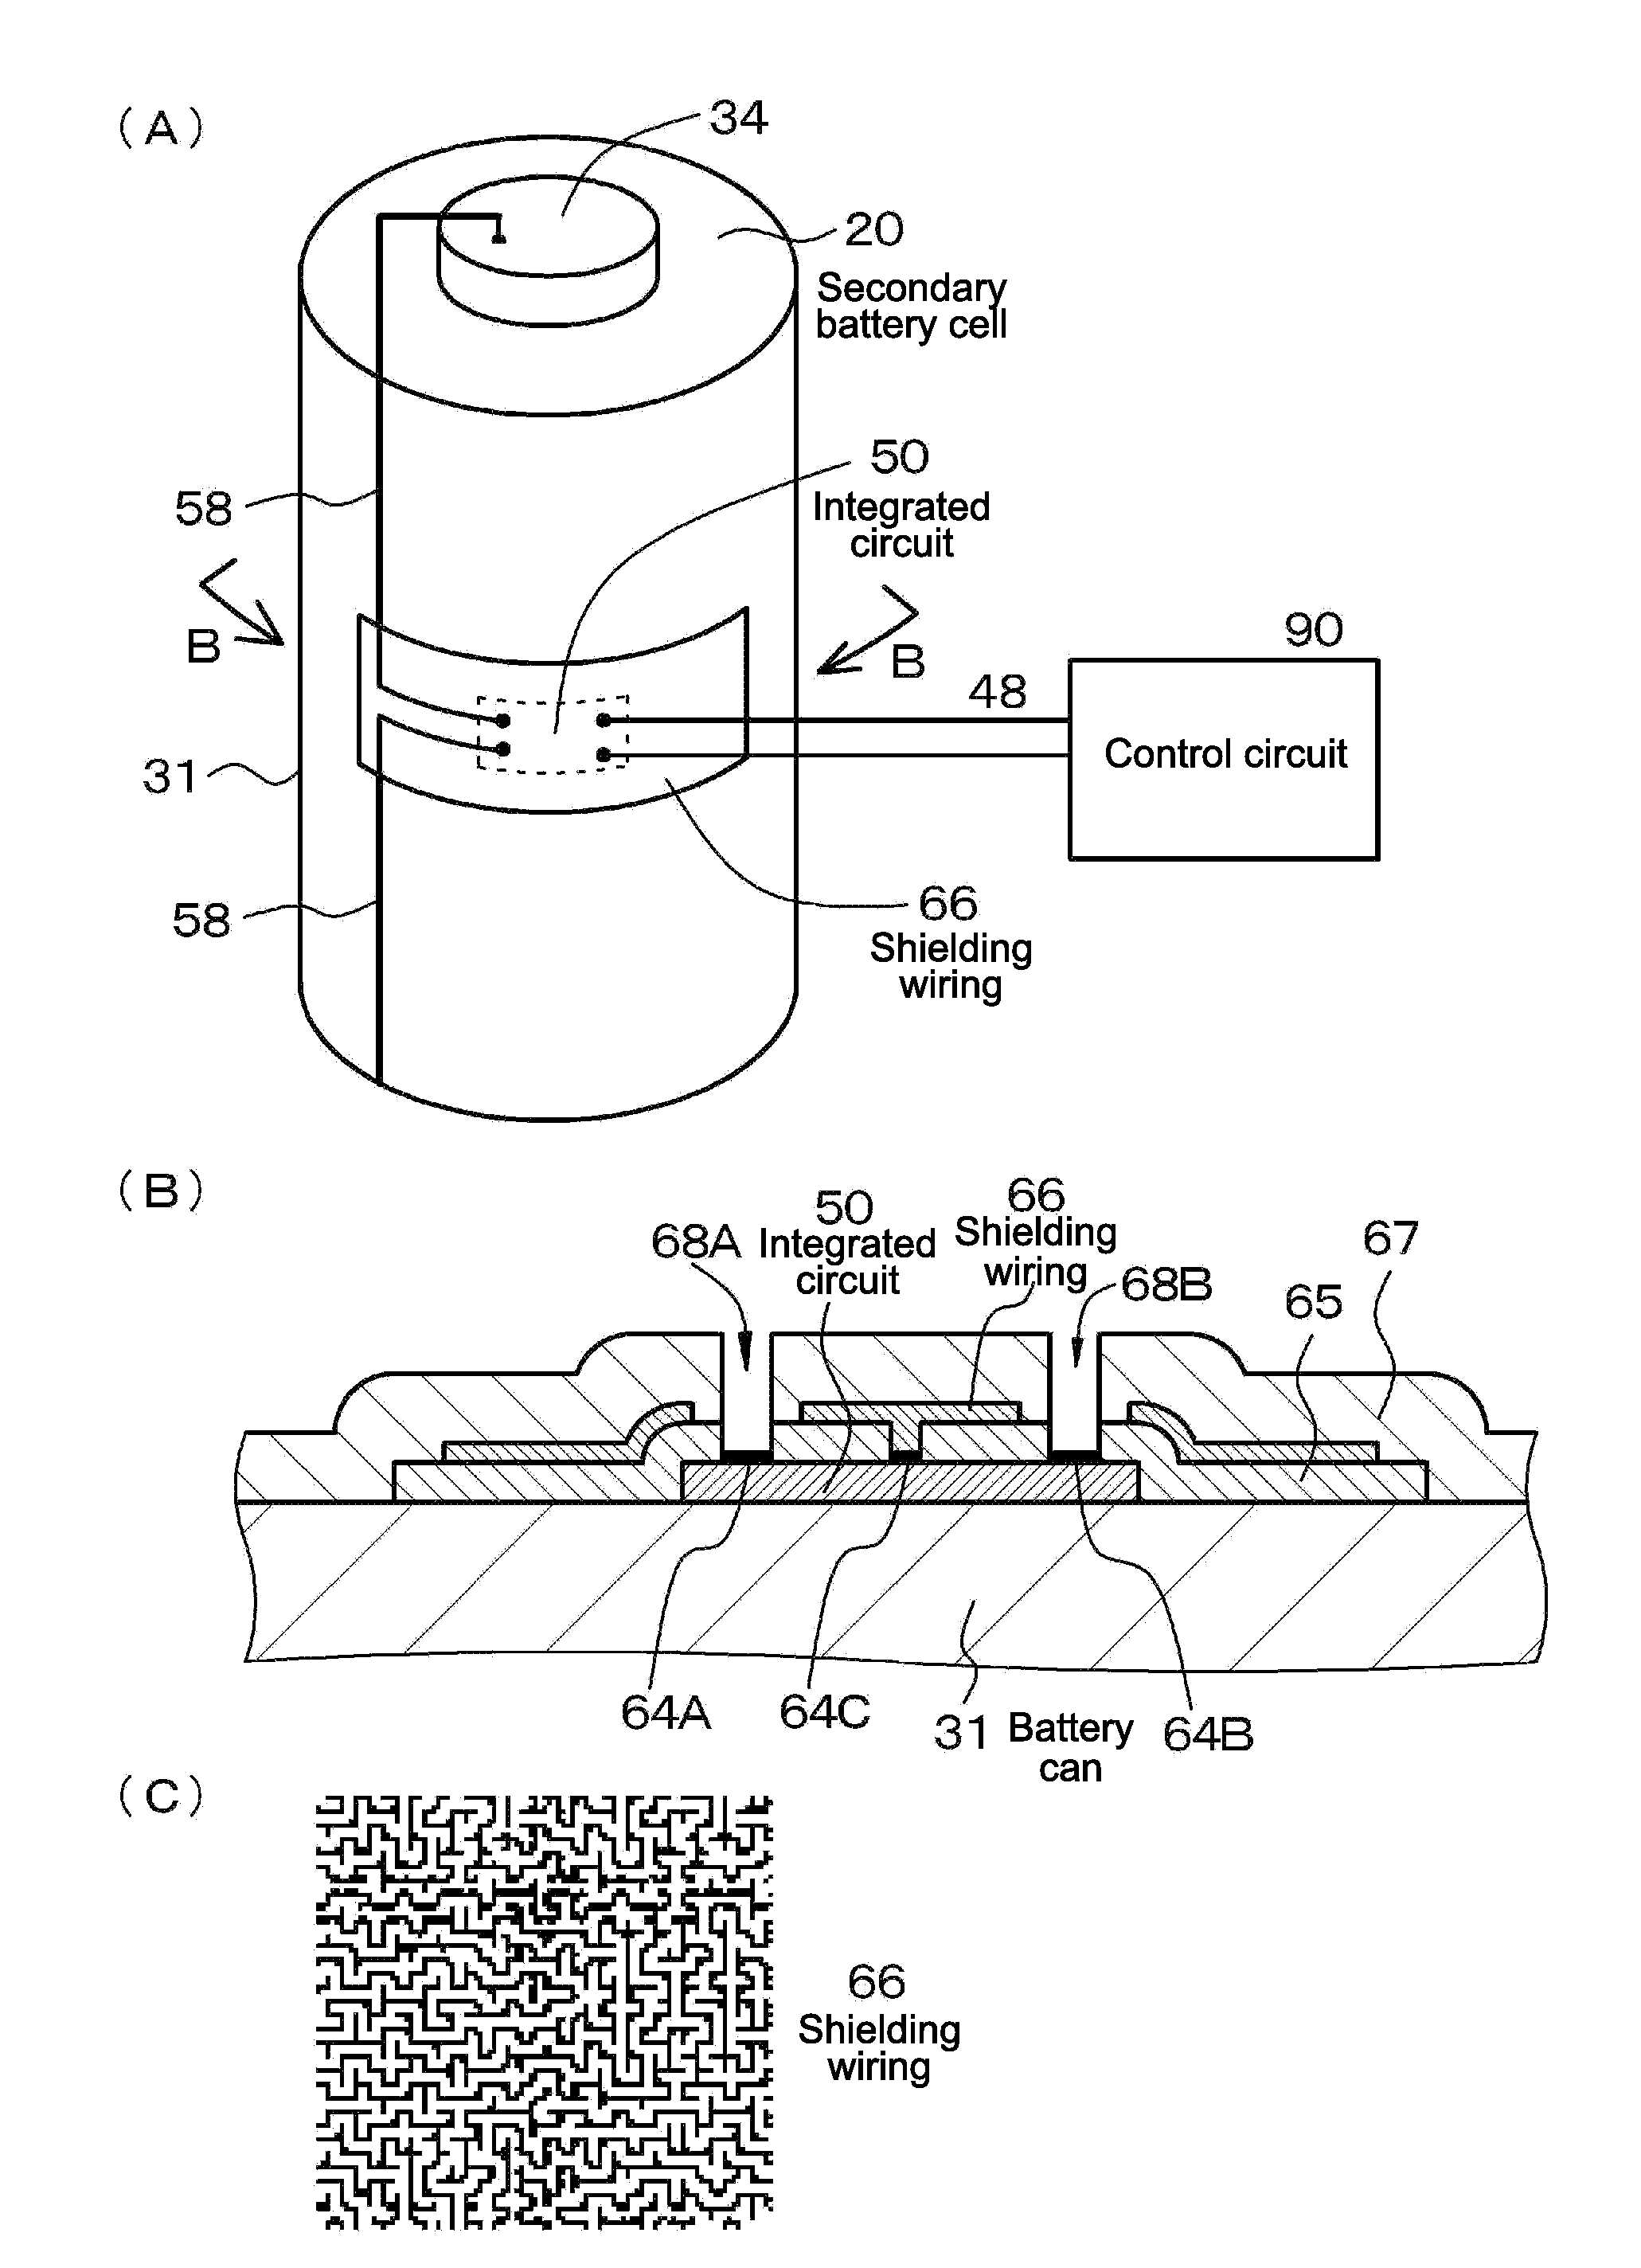 Secondary battery cell, battery pack, and power consumption device